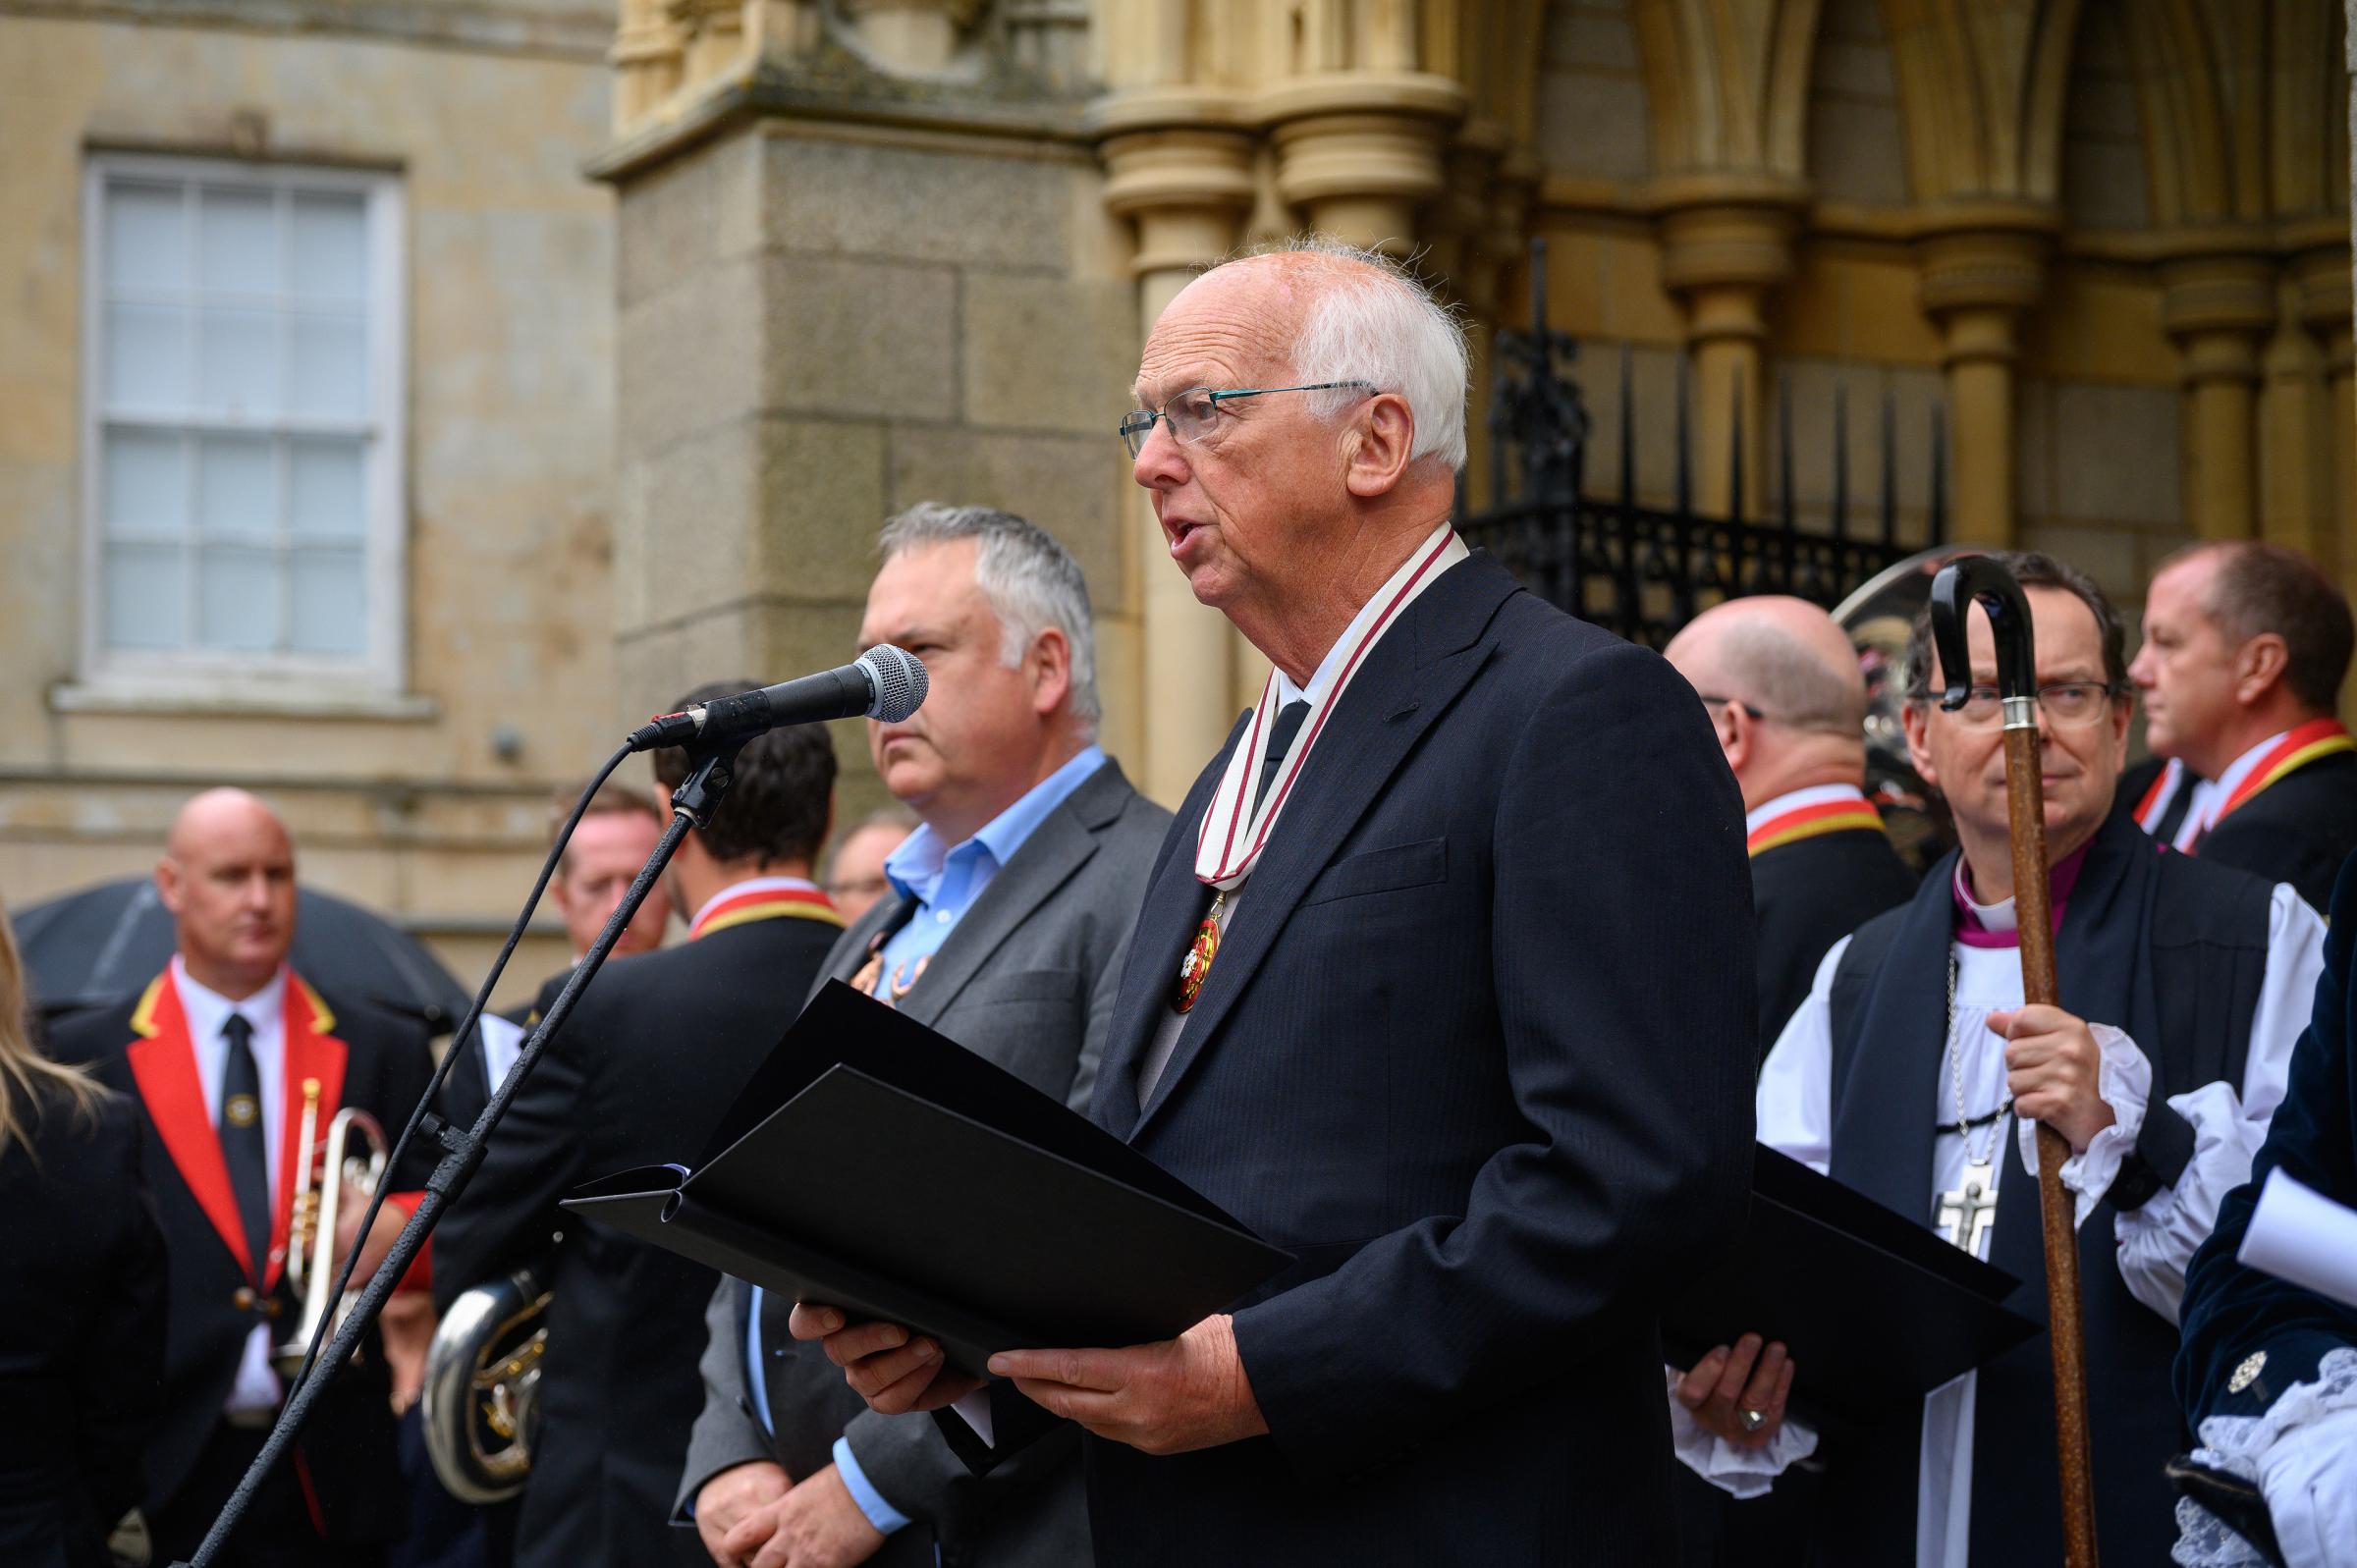 Truro had two Proclamation ceremonies yesterday Picture: Paul Richards PR4Photos